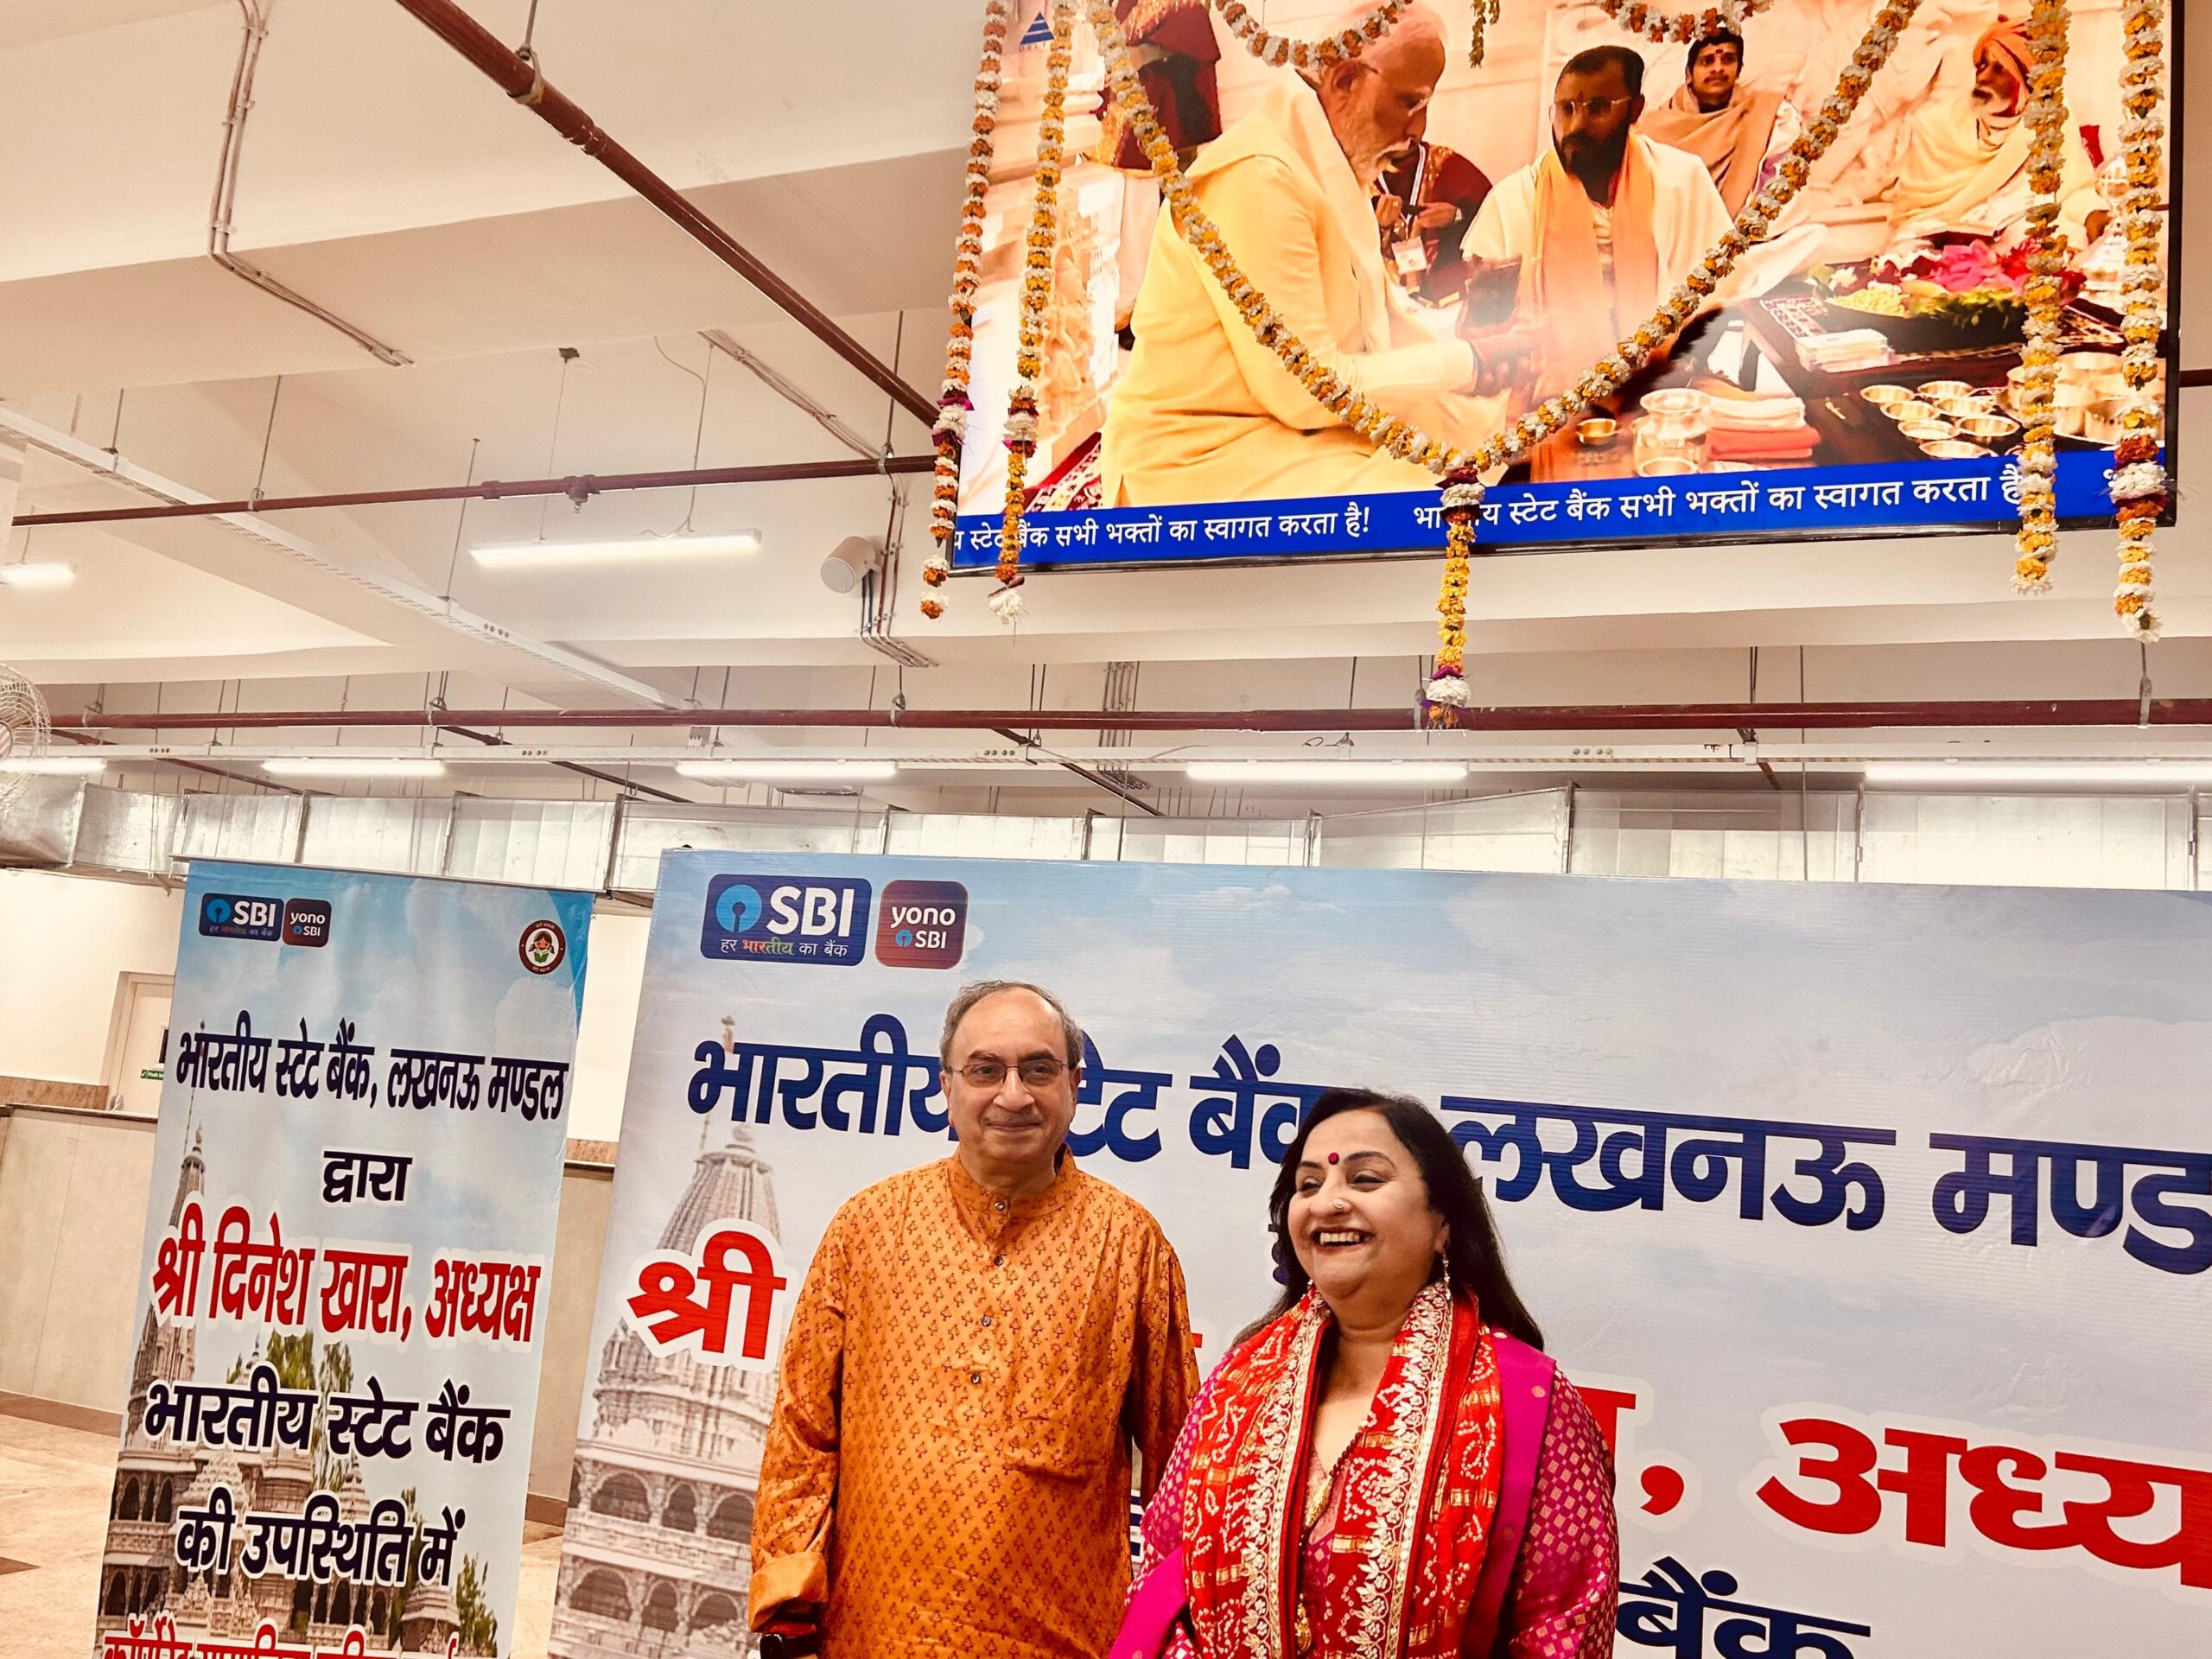 Delta IT Network Commissions LED walls for devotees at Ram Janmabhoomi Ayodhya under SBI’s CSR plan IT Voice